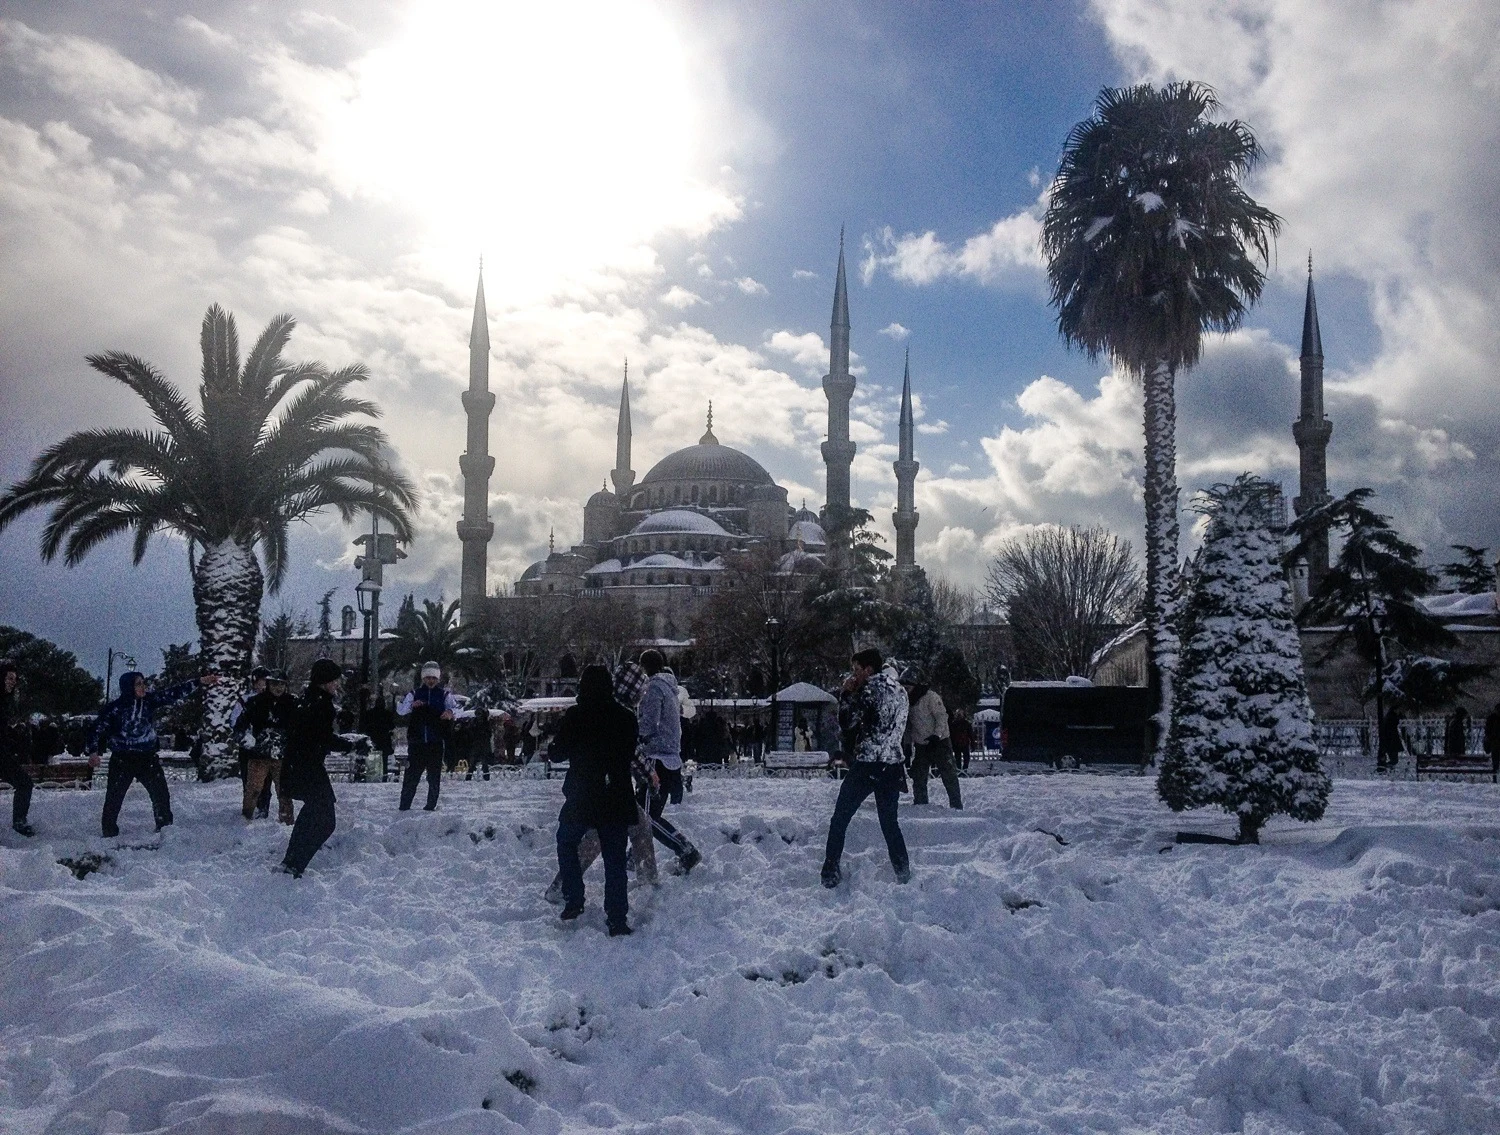 A rare snowfall at the Blue Mosque in Istanbul, Turkey, January 2016.